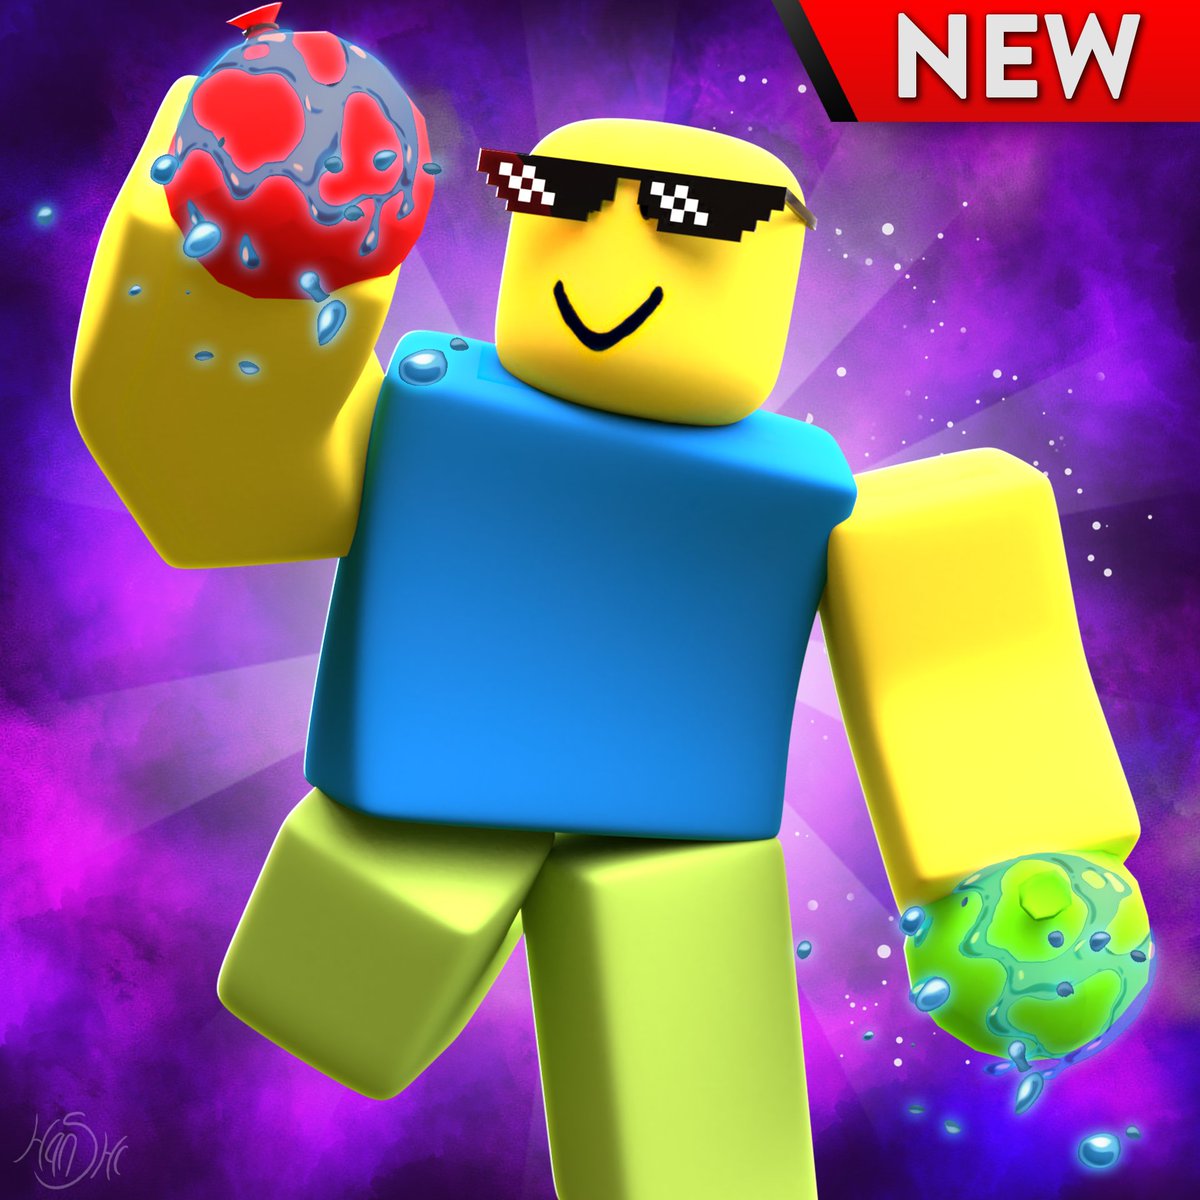 Hans On Twitter Revamped My Icon For Water Balloon Simulator Likes And Retweet S Very Appreciated Inspired By The One And Only Purpllx Roblox Robloxgfx Https T Co Bksfwburaj - balloon simulator in roblox